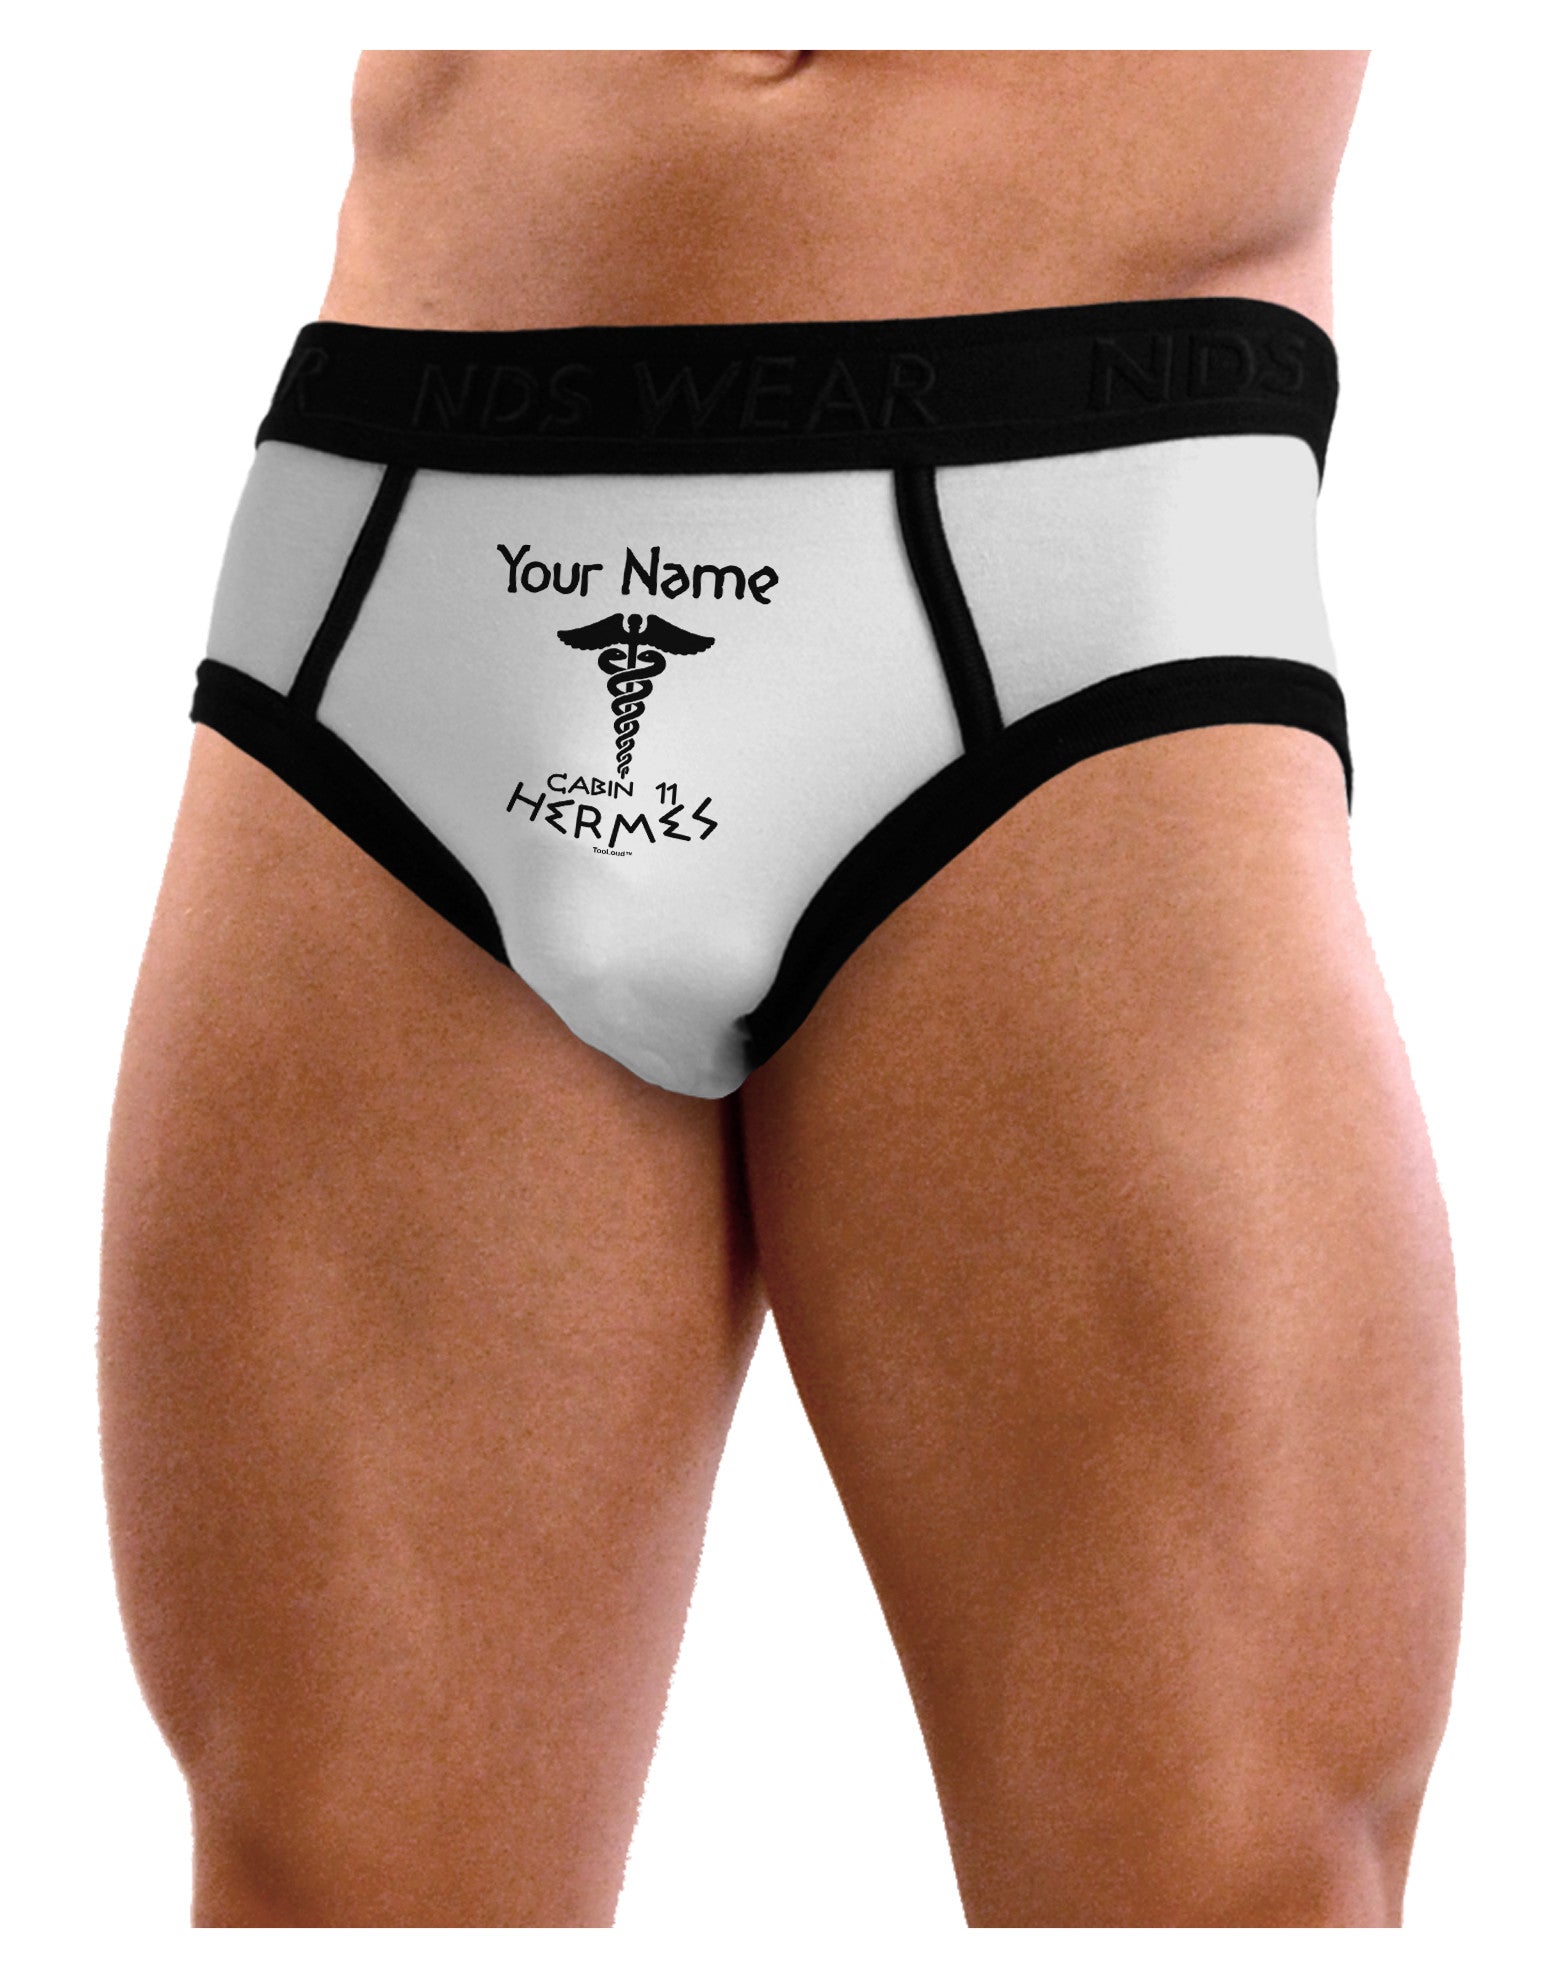 Personalized Thong – Aphermes